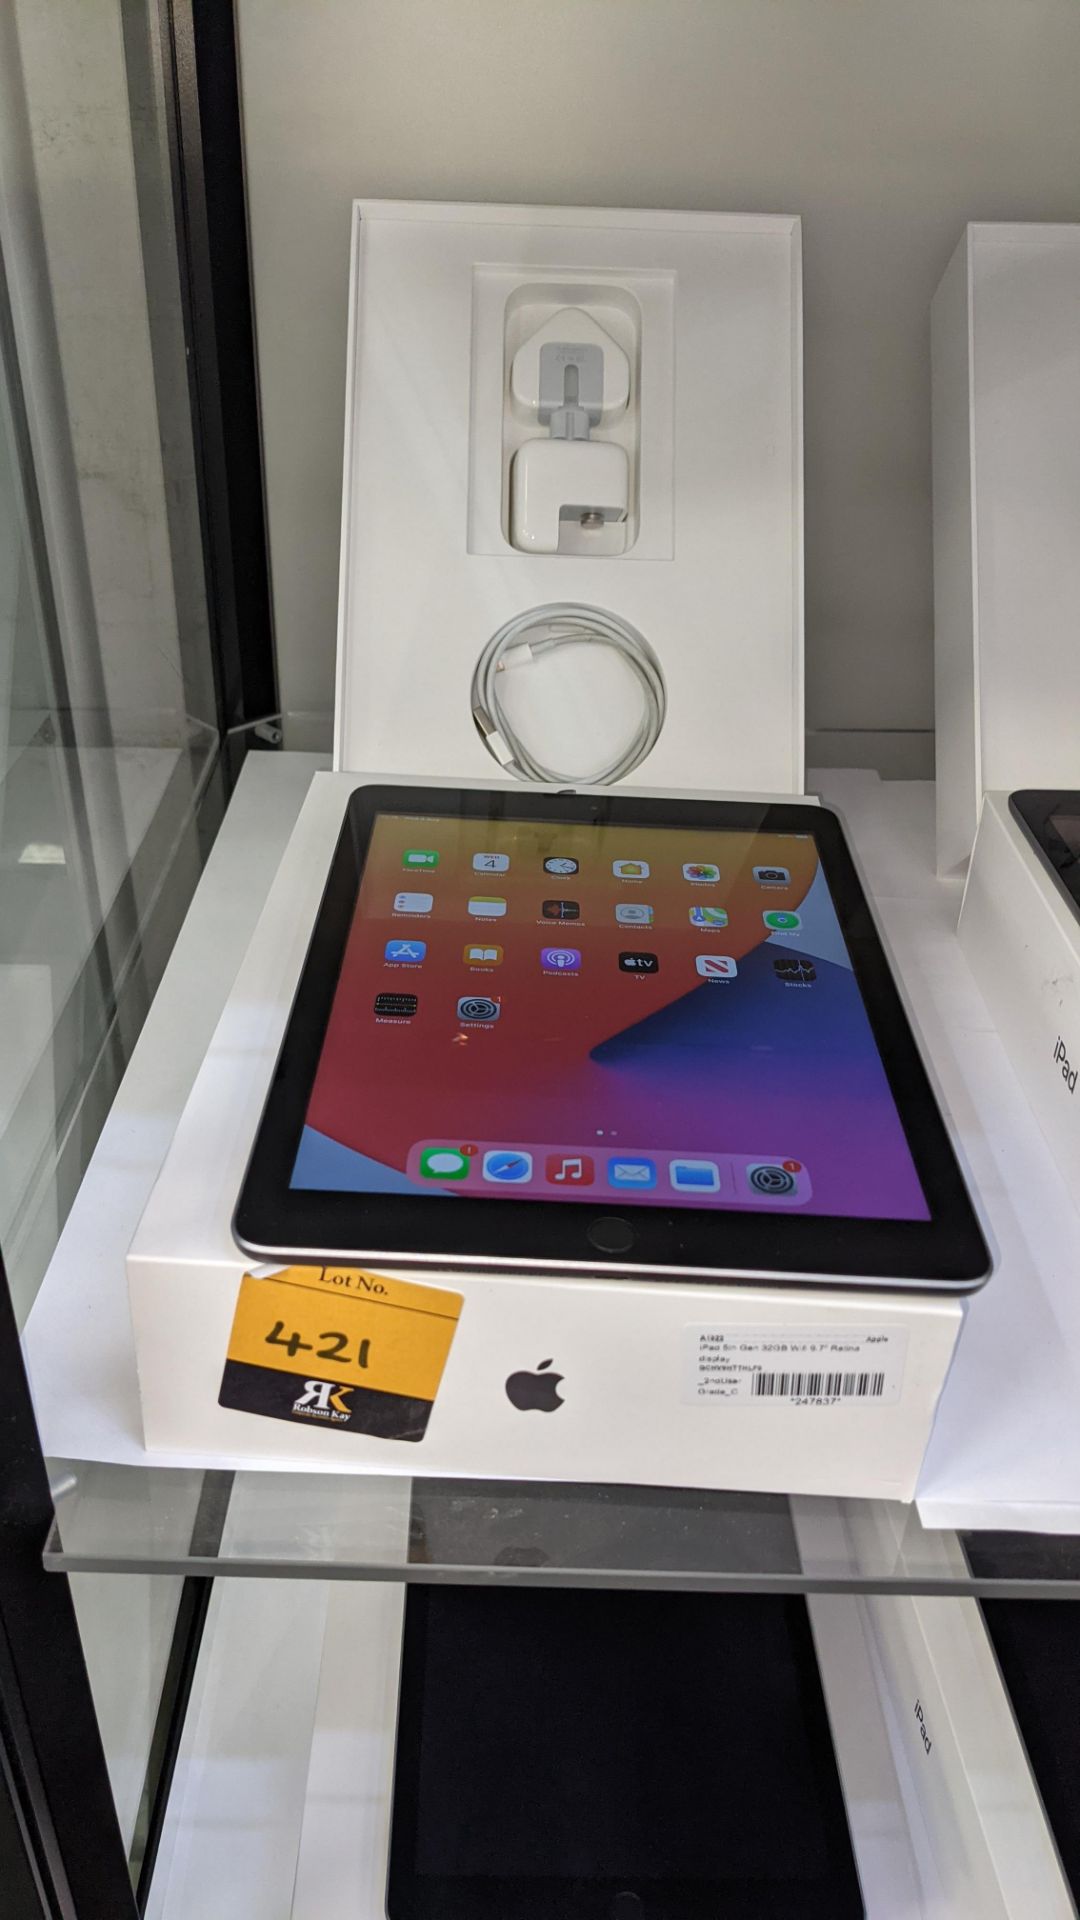 Apple iPad (space grey) 5th generation 32Gb Wi-Fi 9.7" Retina screen. Product code A1822. Apple A9 - Image 2 of 10